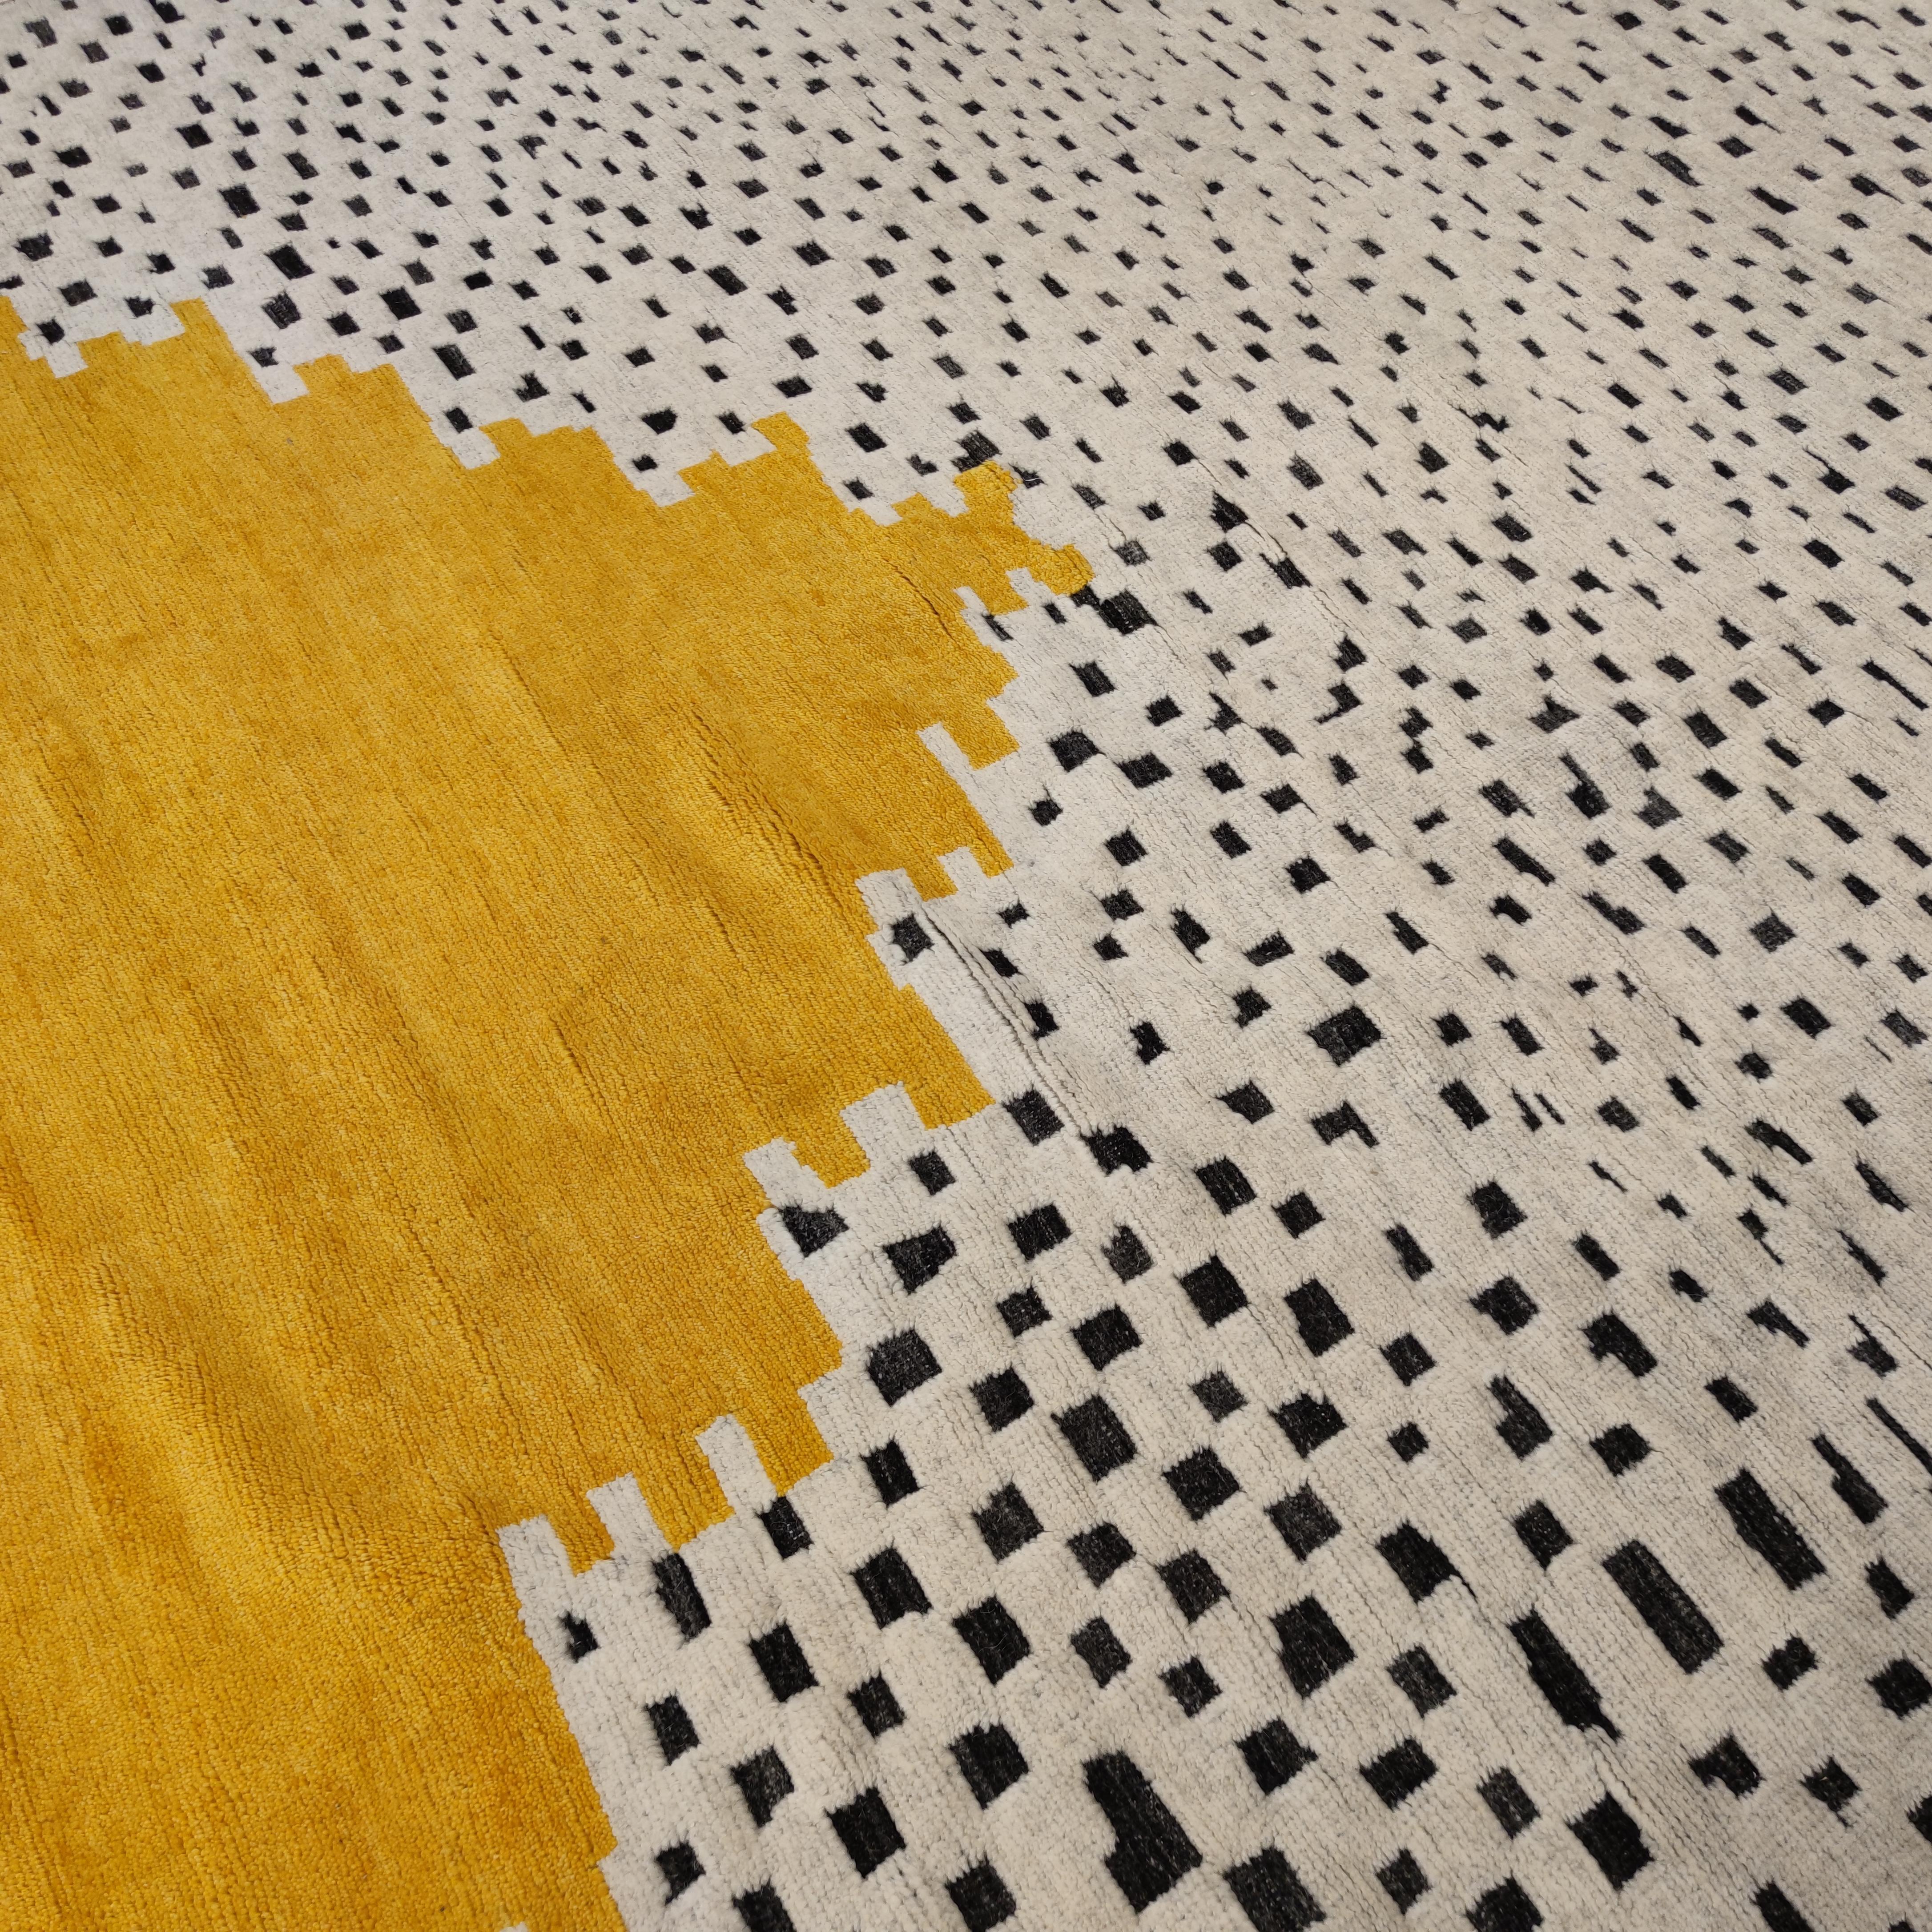 In 'Niches', the contemporary Swiss artist Simone Haug takes up the stacked niche element, especially as seen on old central Anatolian Tulu rugs, and develops a pattern which unites an archaic past to an optimistic vision of the future.

Yellow is